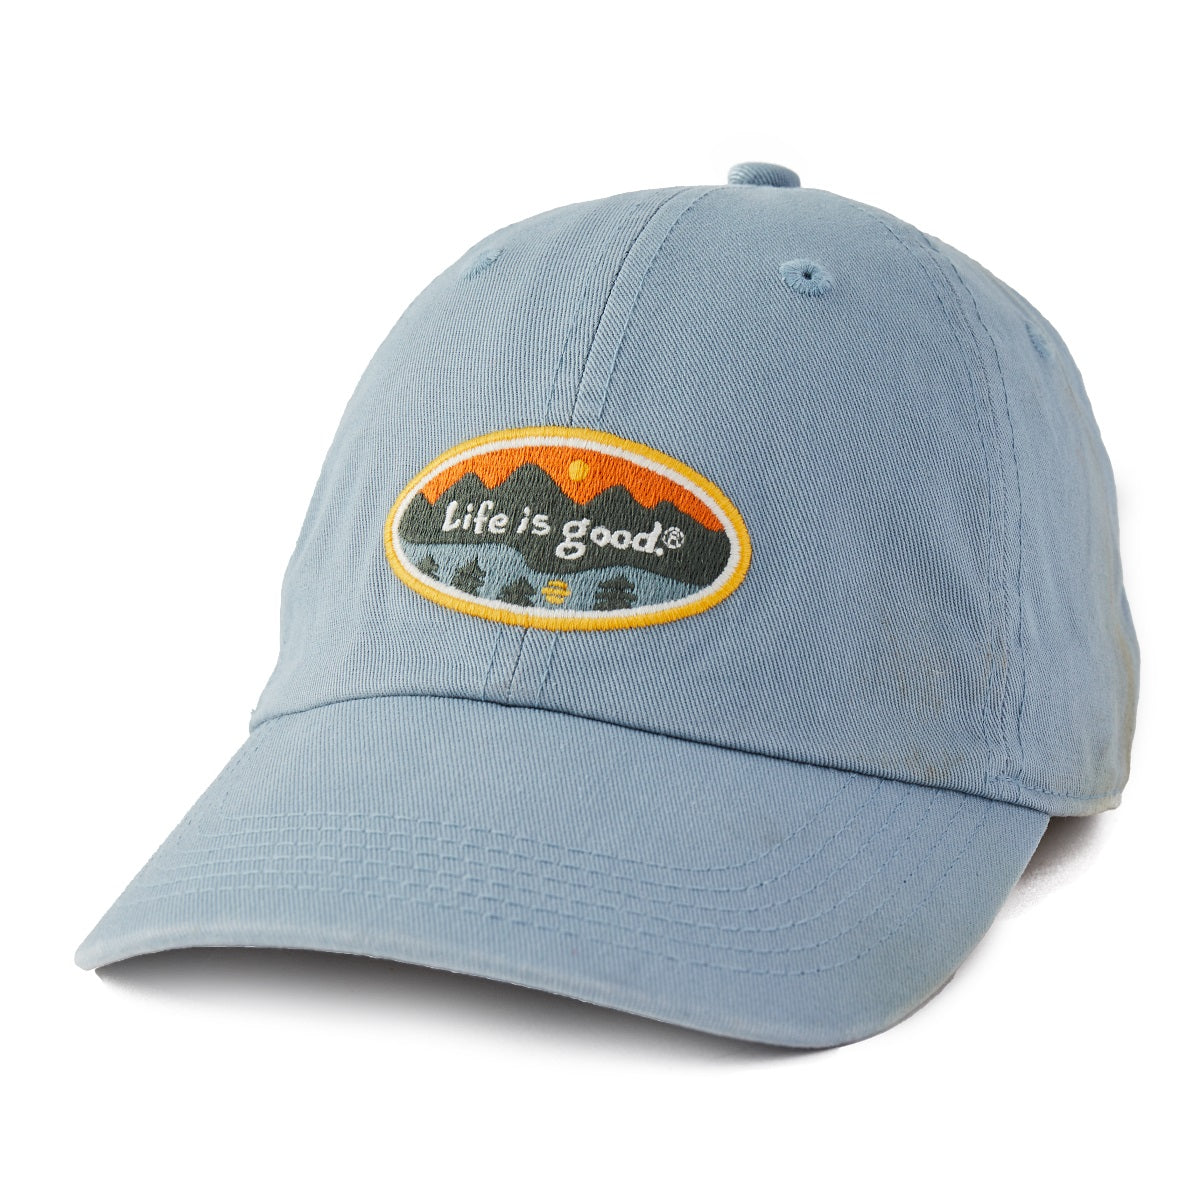 Life is good Chill Cap Lig Mountains Hat, Slate Gray, One Size